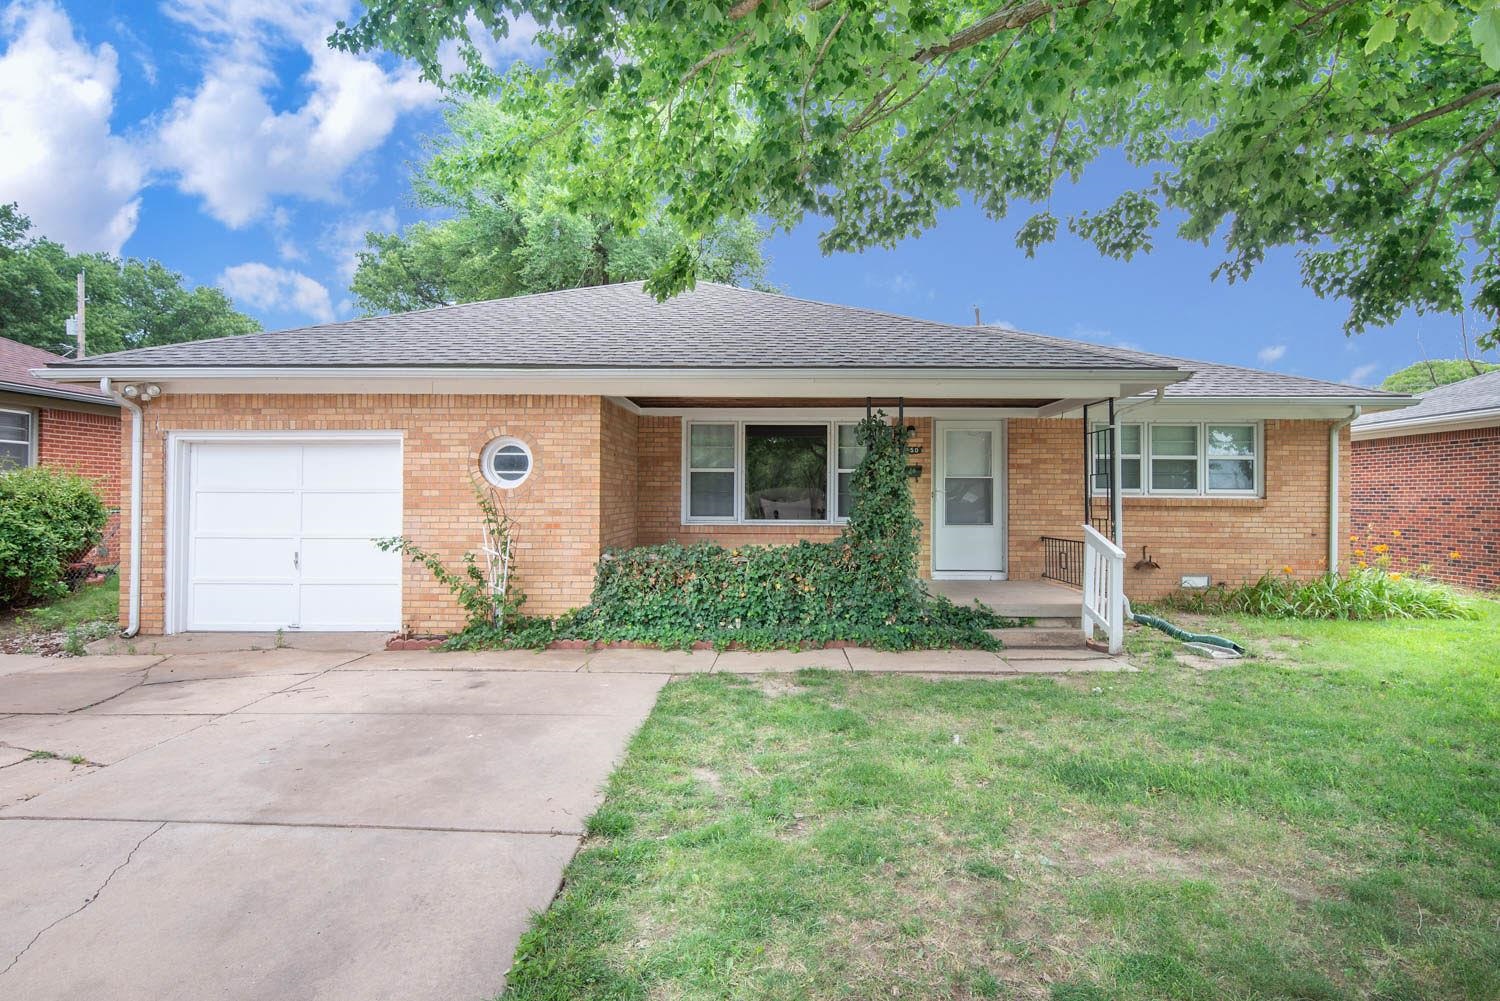 DFT - UPGRADED ALL BRICK DERBY RANCH FEATURING 2 BEDS 1.5 BATHS & OVER 1200 SQ FT IN A GREAT AREA!  